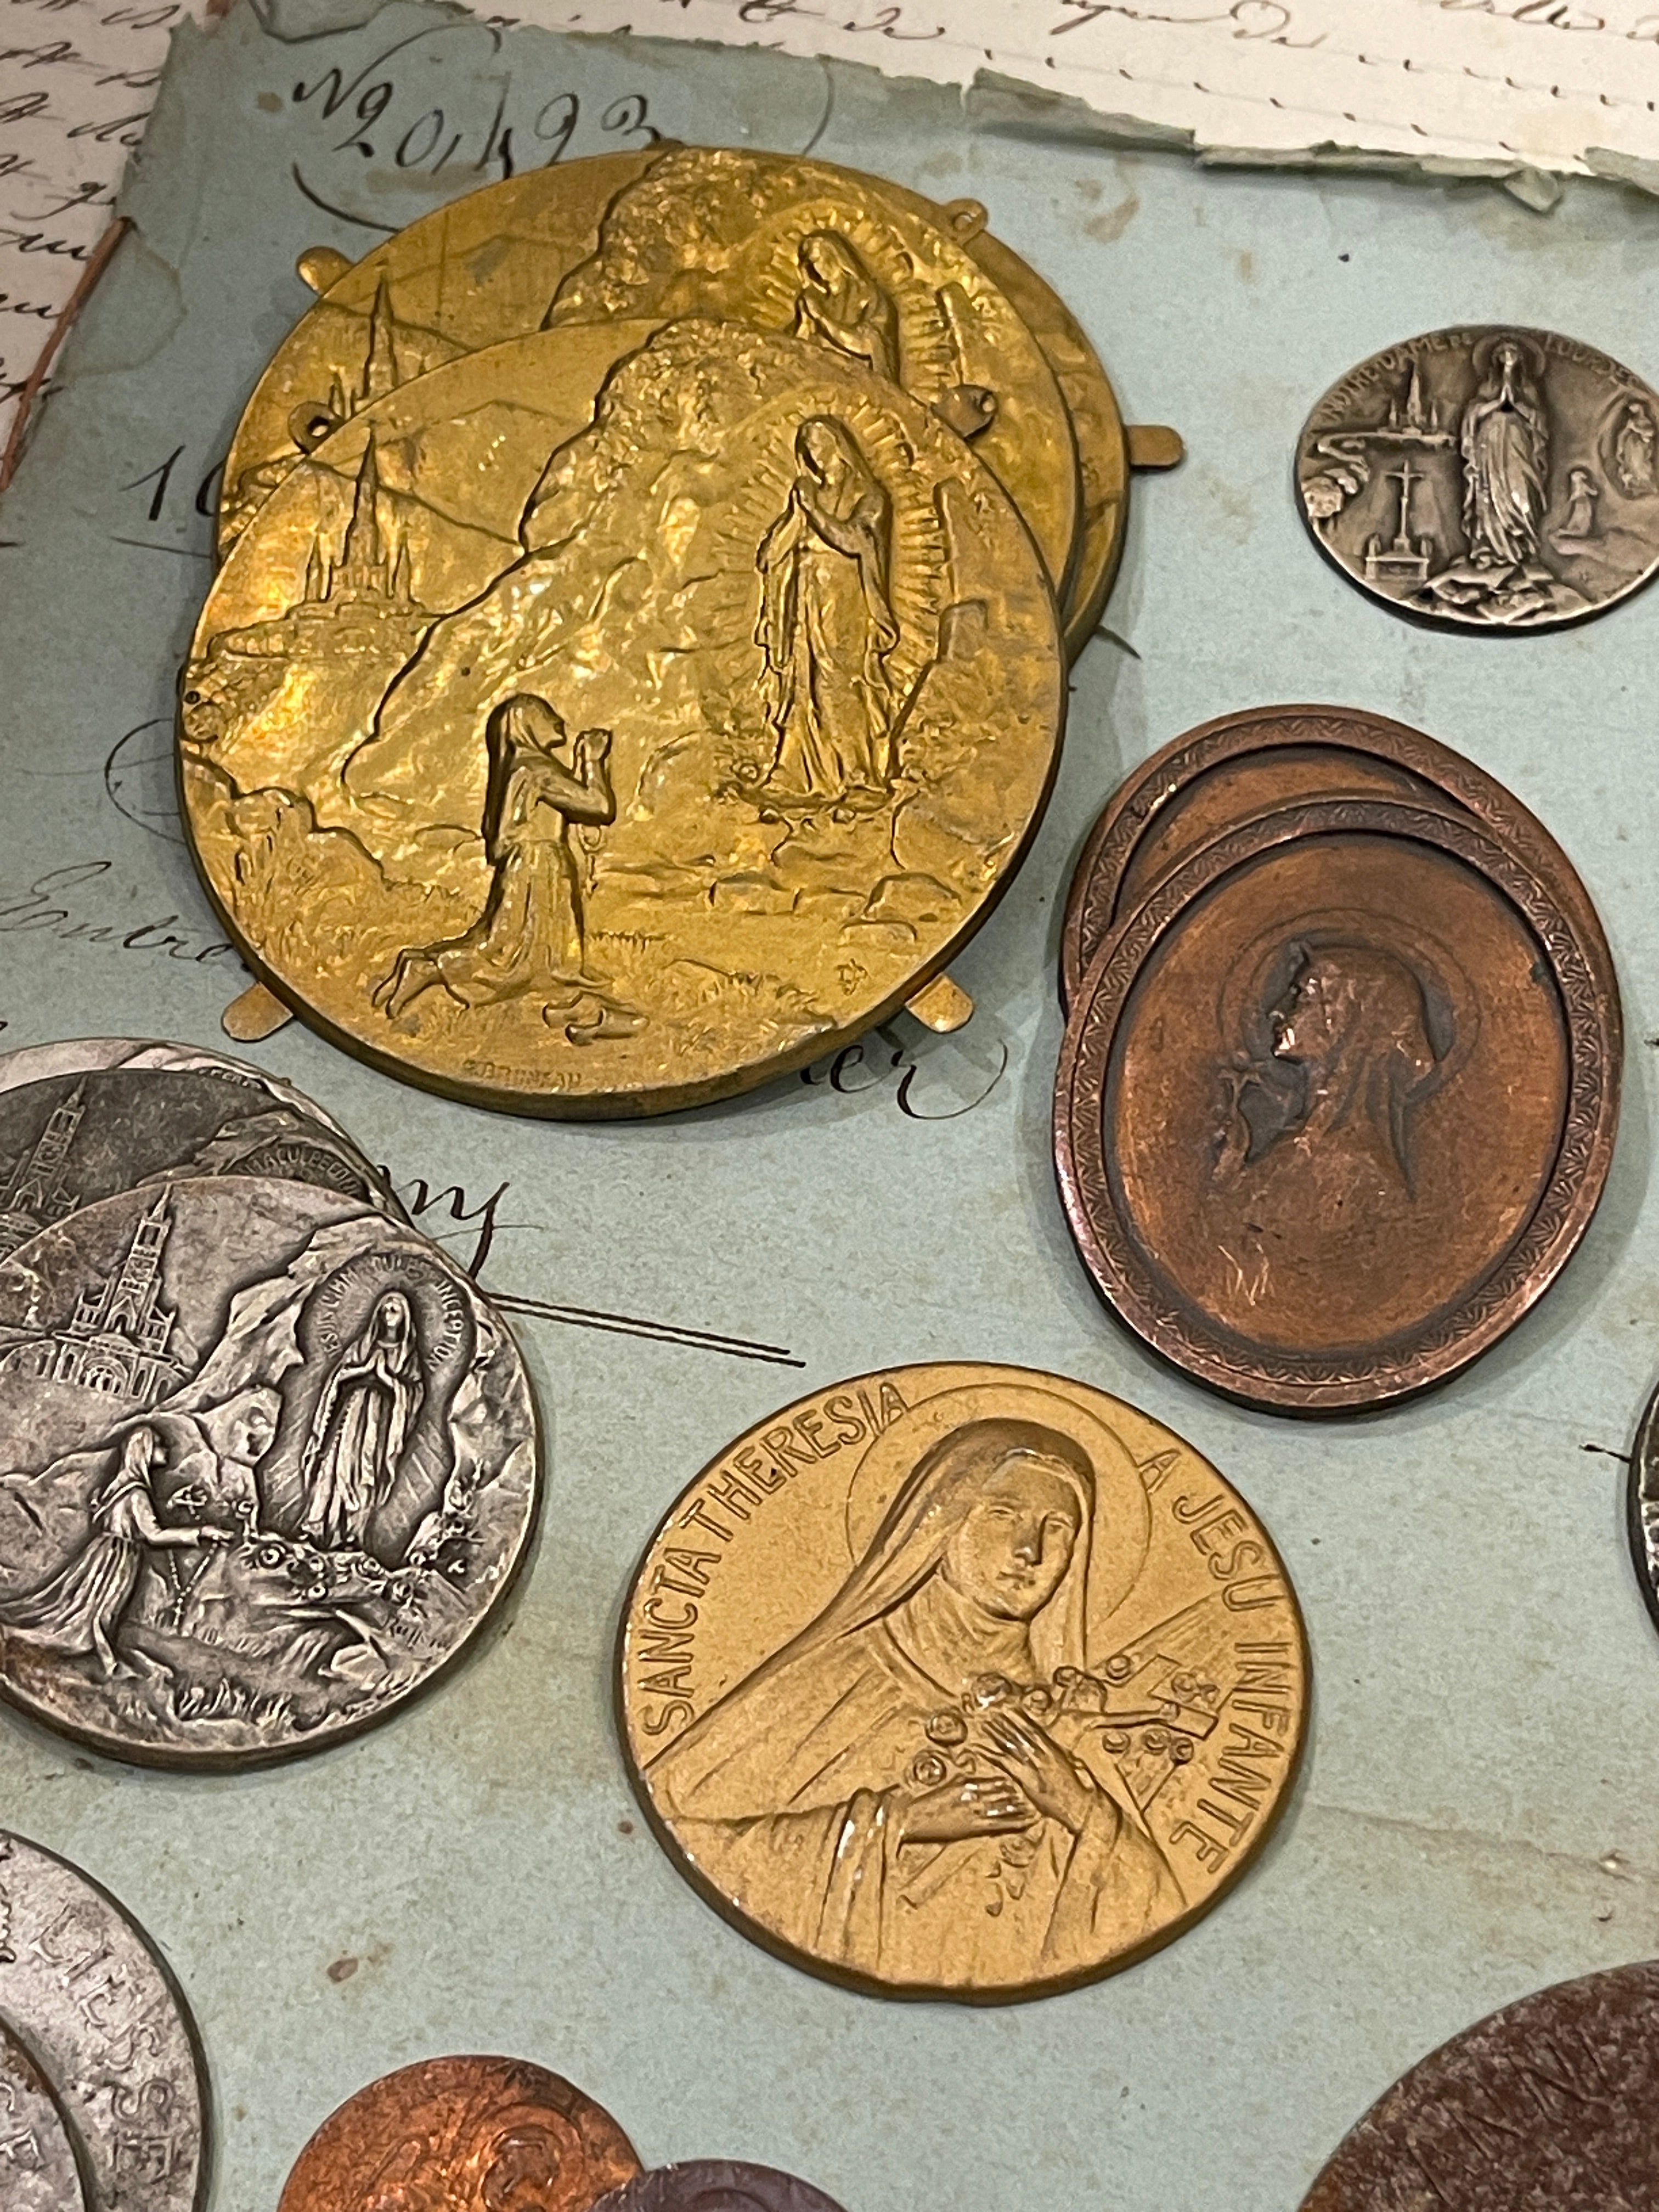 Antique and Vintage Metal Pieces from Lourdes - B